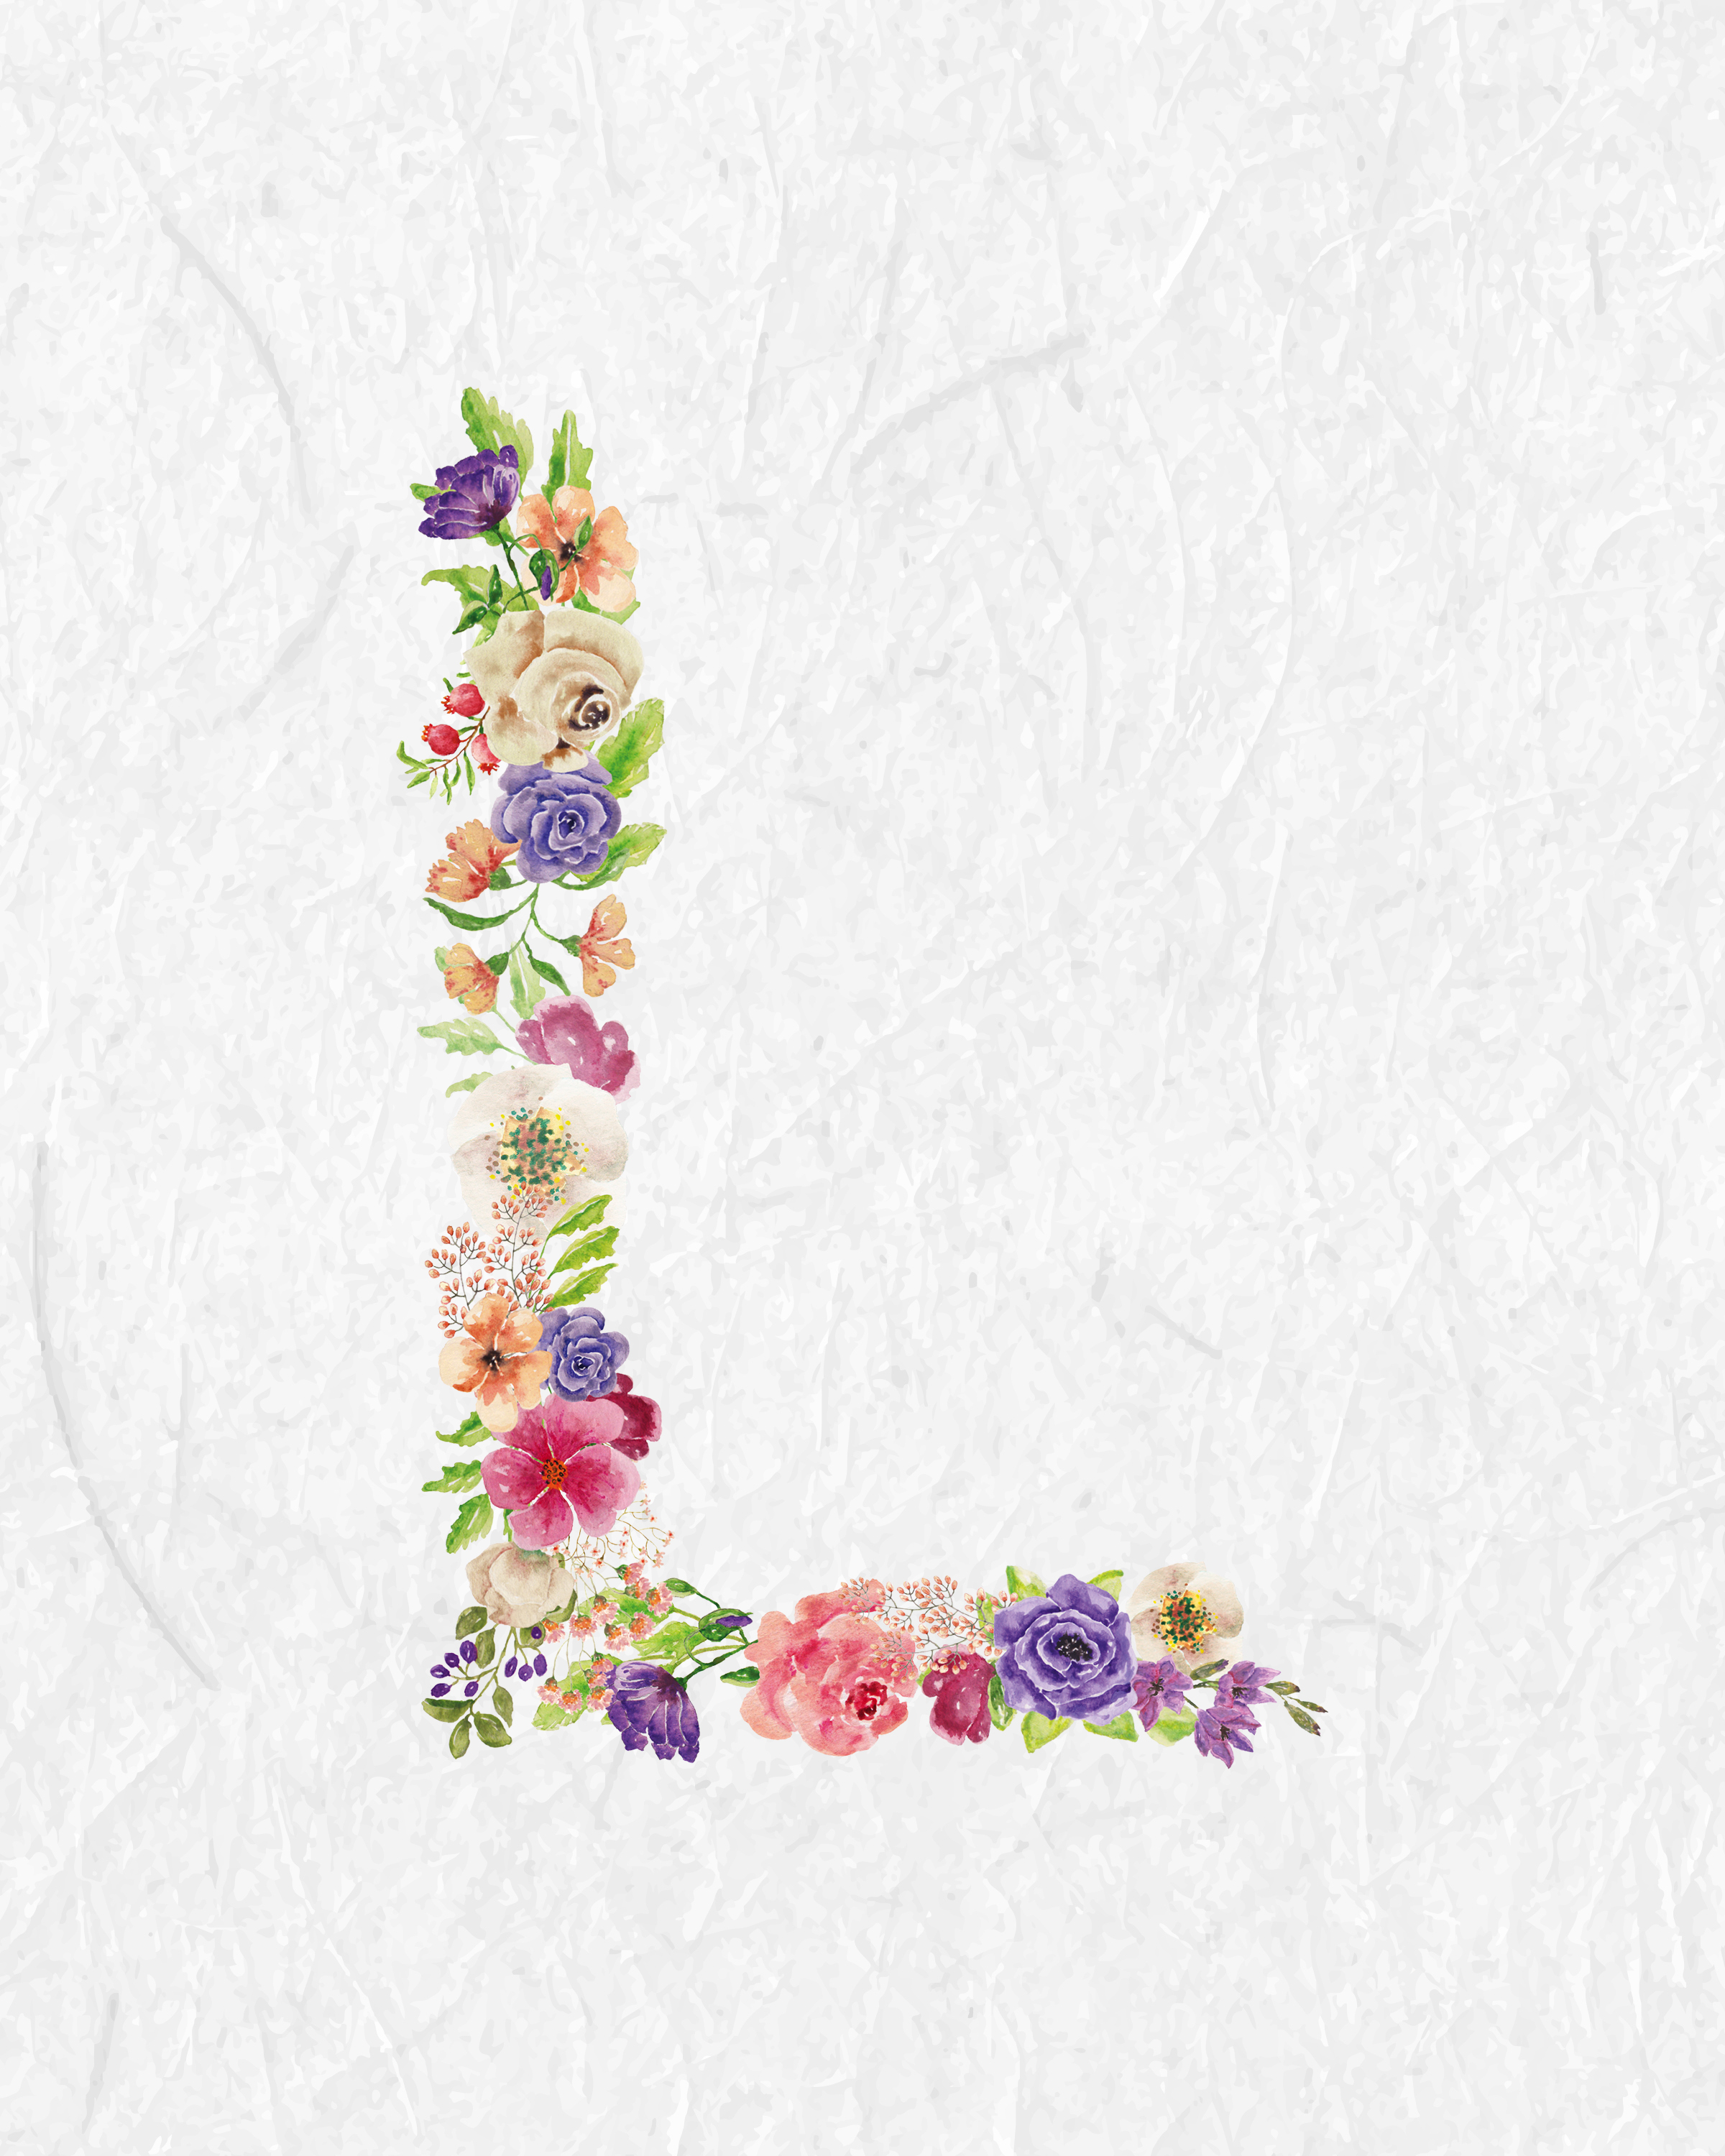 Free Printable Floral Monograms - The Cottage Market - Free Printable Flower Letters